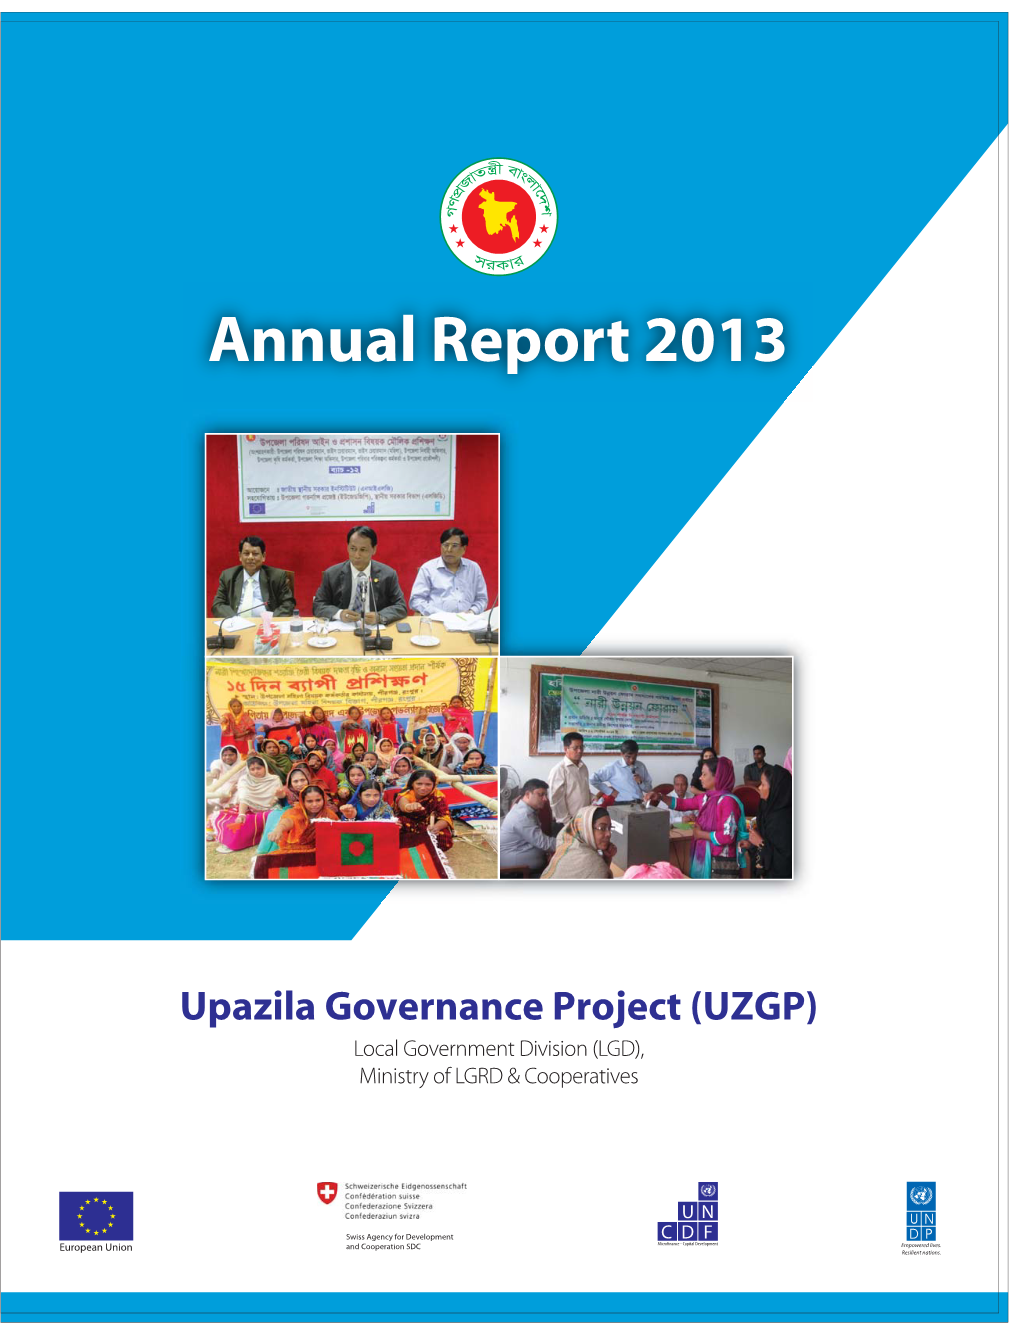 Upazila Governance Project (UZGP) Local Government Division (LGD), Ministry of LGRD & Cooperatives Annual Report 2013